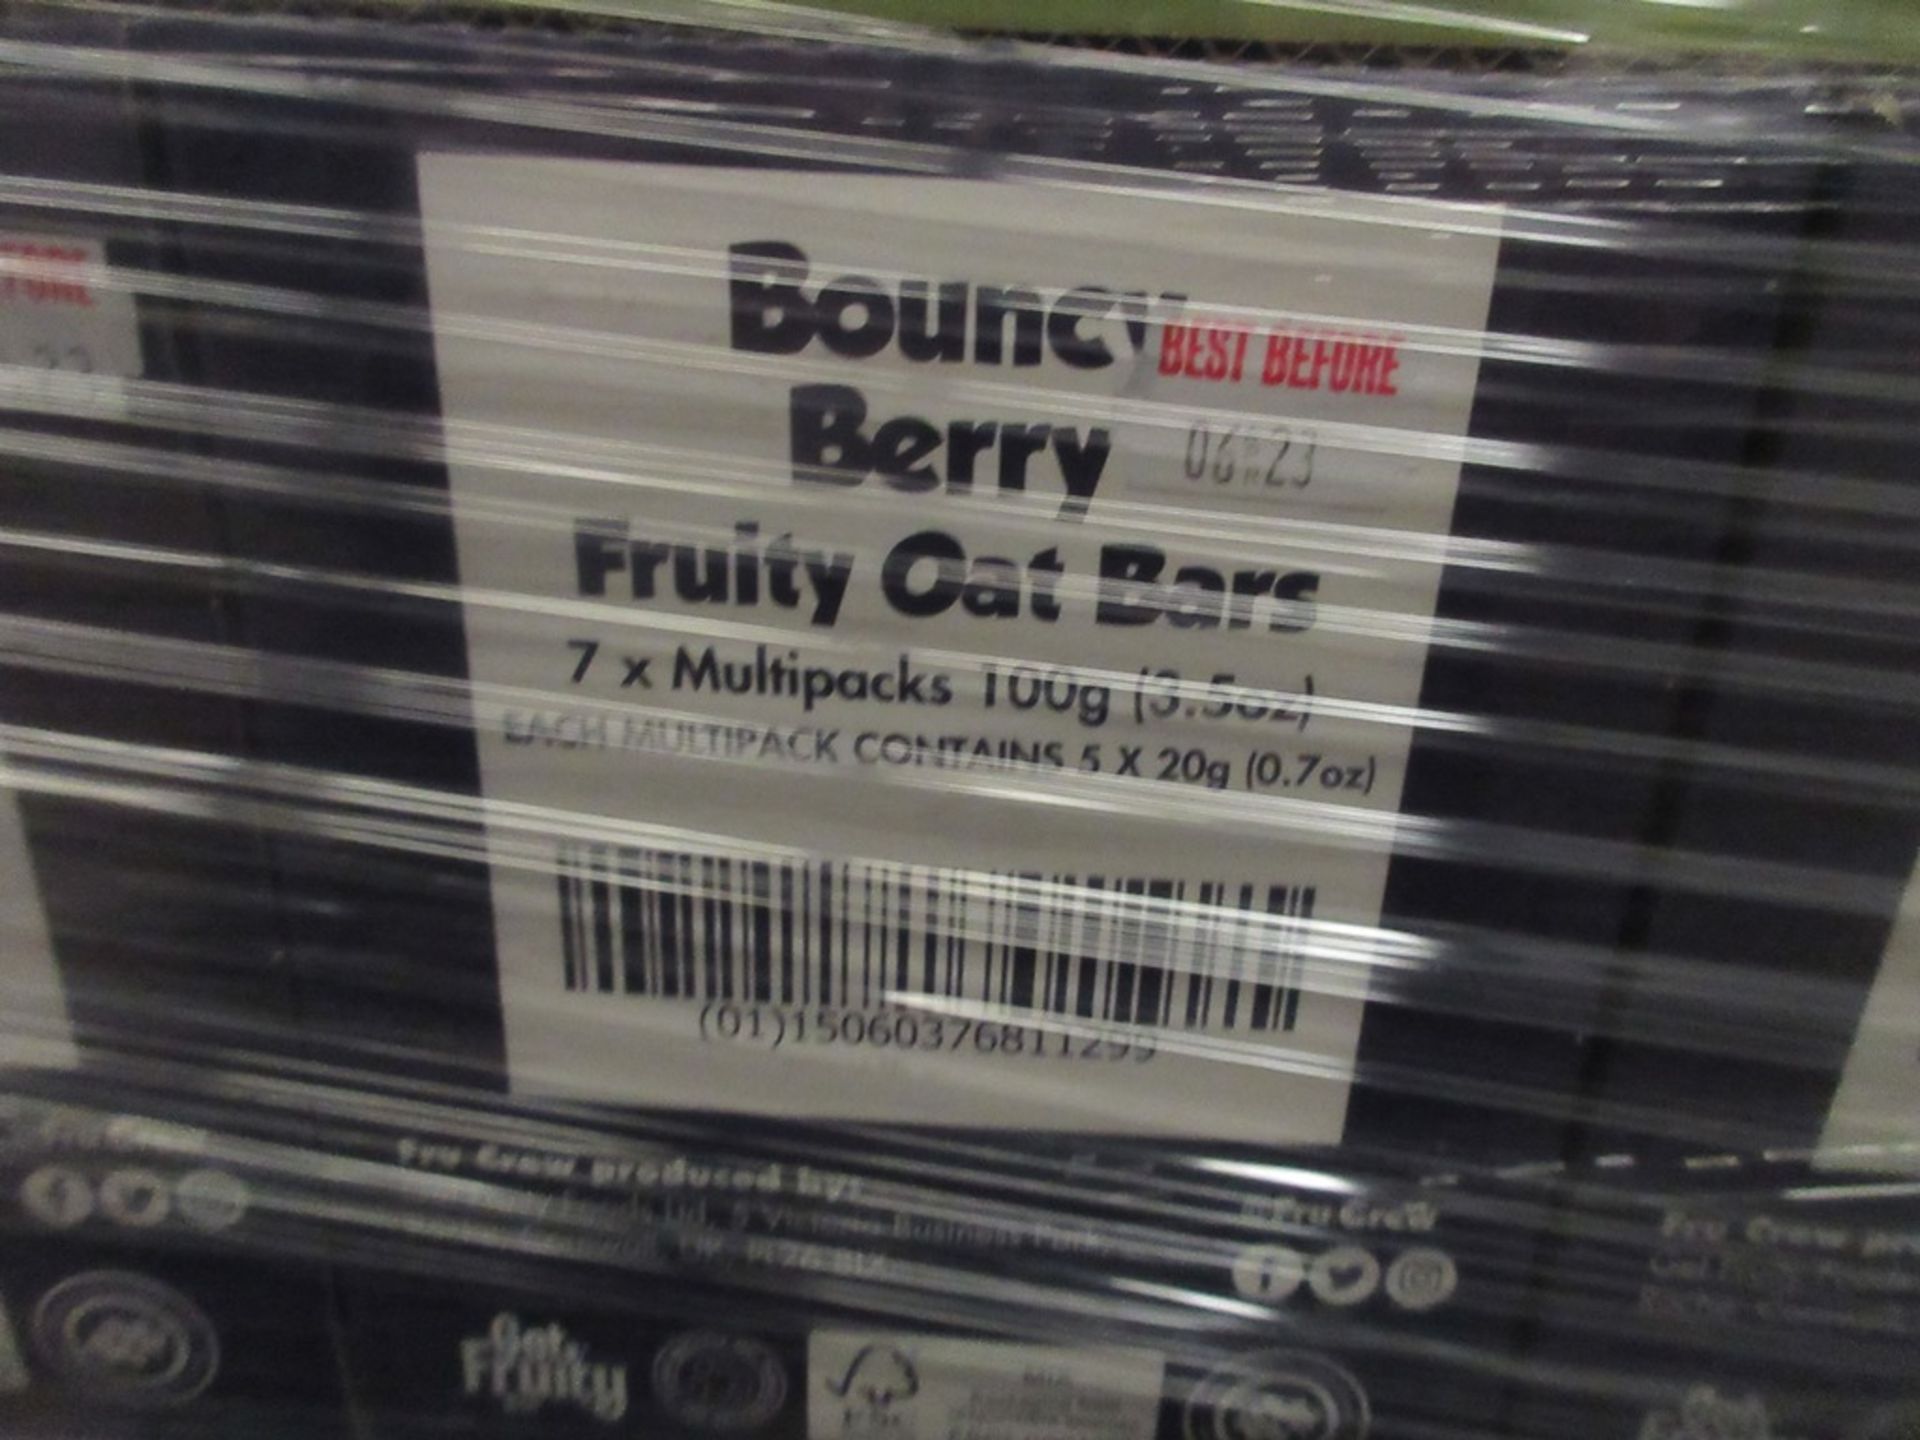 Pallet of 301 boxes x 35 x 20g Fru Crew Bouncy Berry fruit oat bars - expiry April 2023 - Image 2 of 3